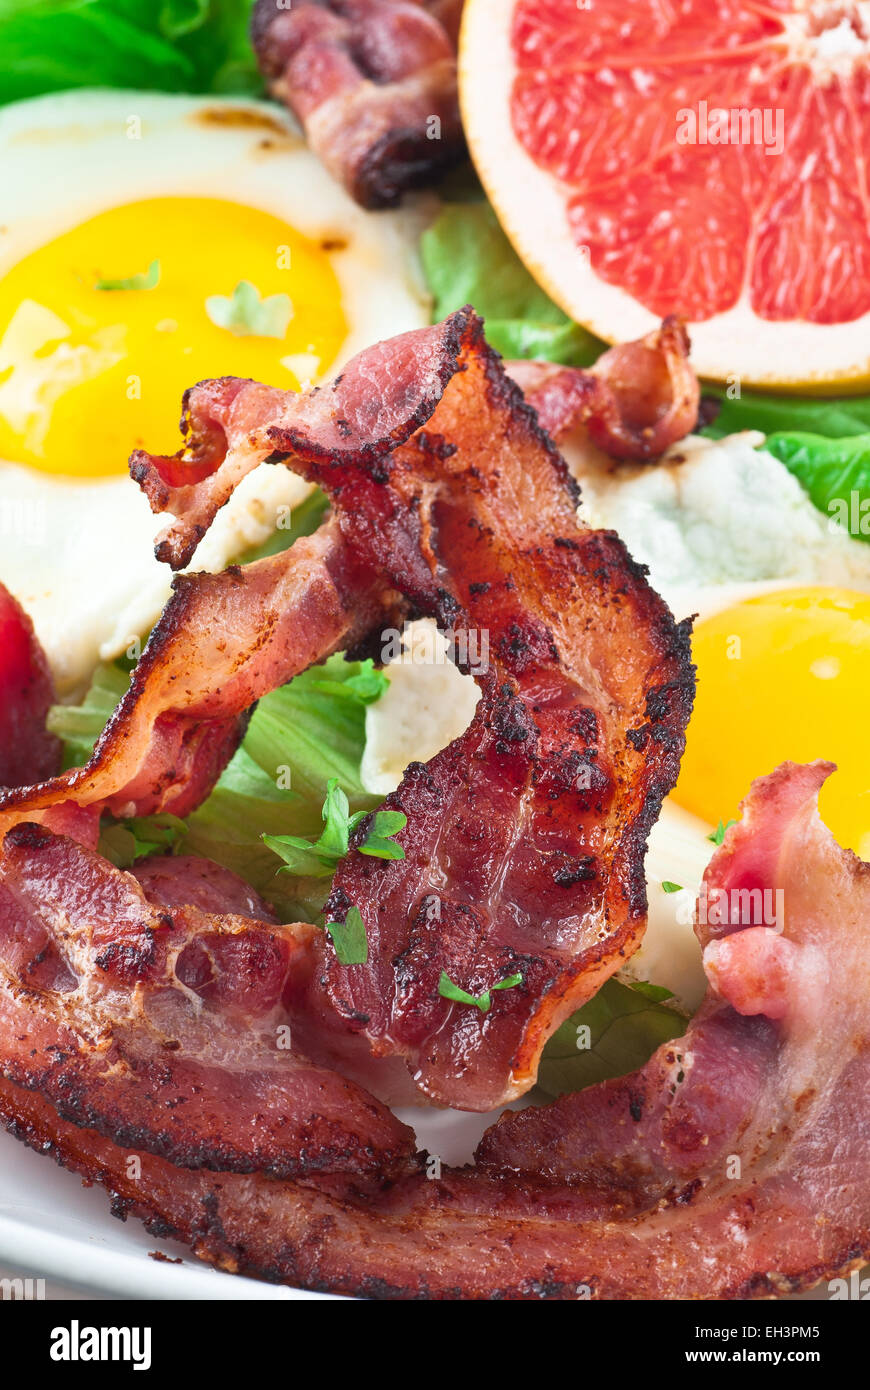 Bacon with fried eggs, lettuce and grapefruit. Stock Photo